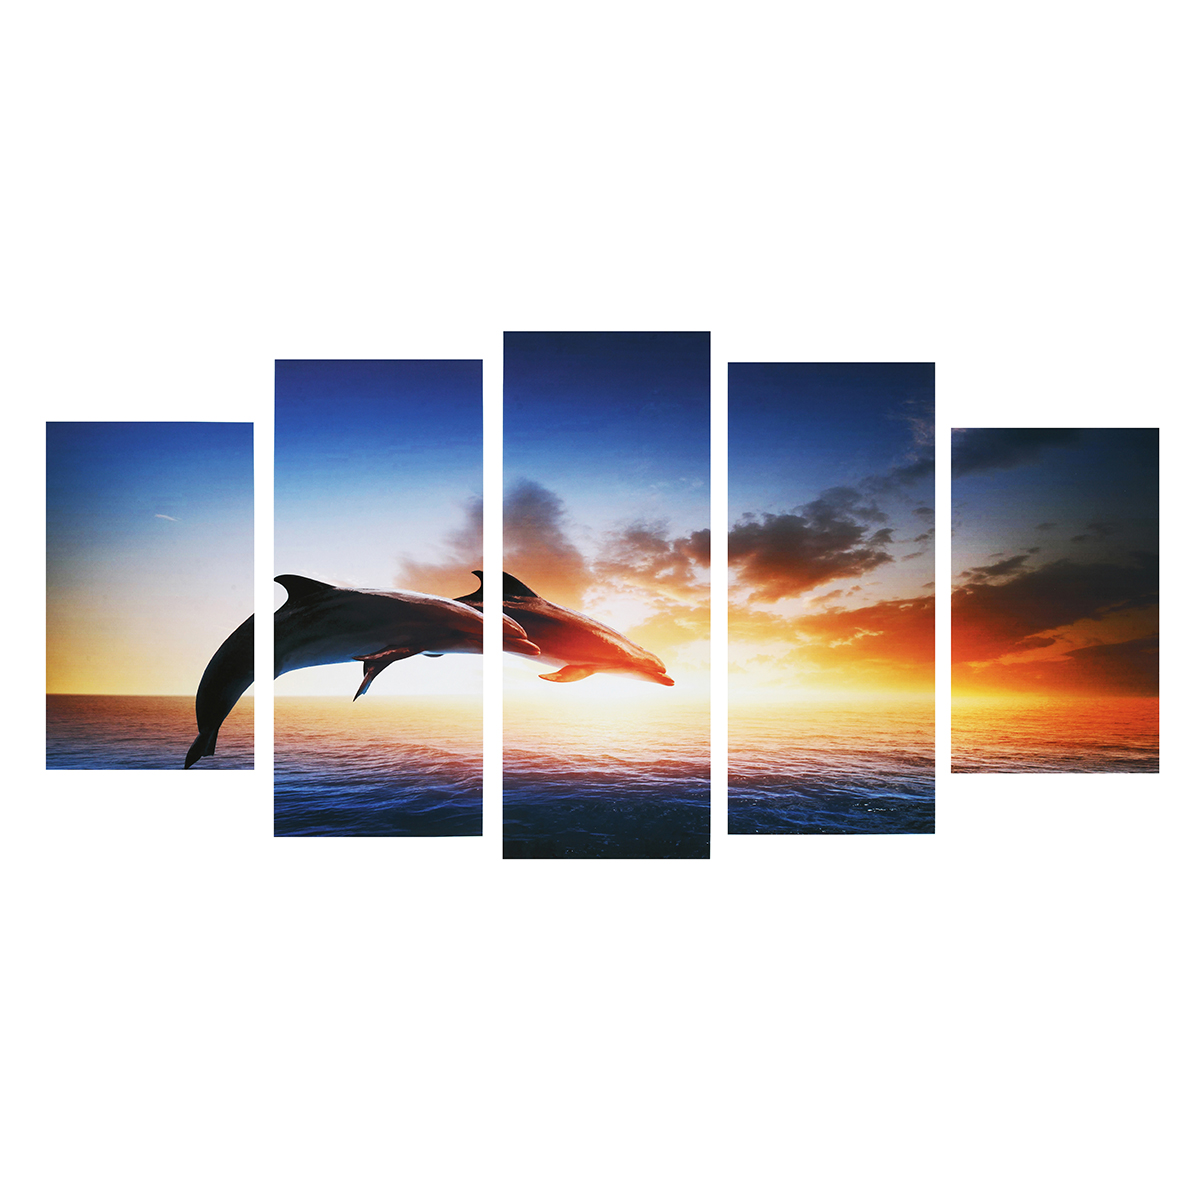 Dolphin-Sunset-Canvas-Print-Paintings-Poster-Wall-Art-Picture-Home-Decor-Unframed-1638931-5